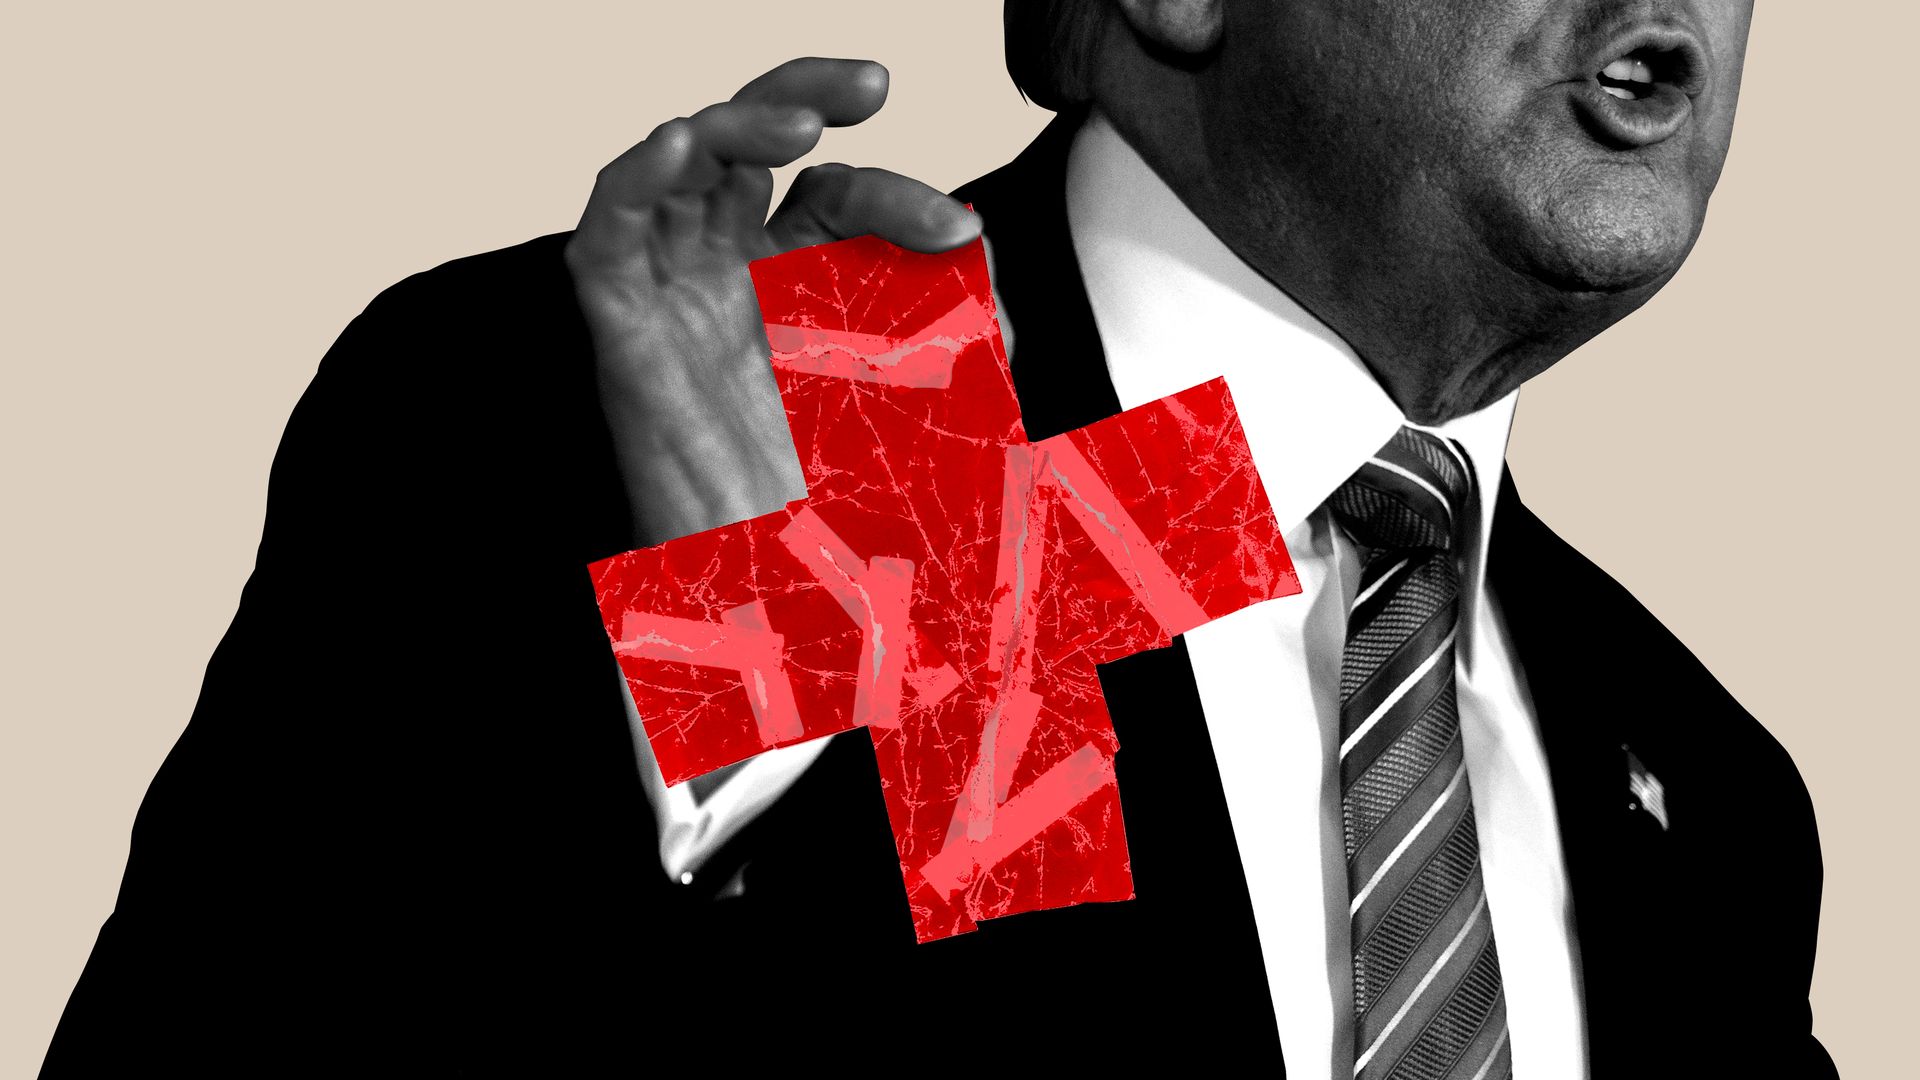 Illustration of President Trump holding a red health care cross